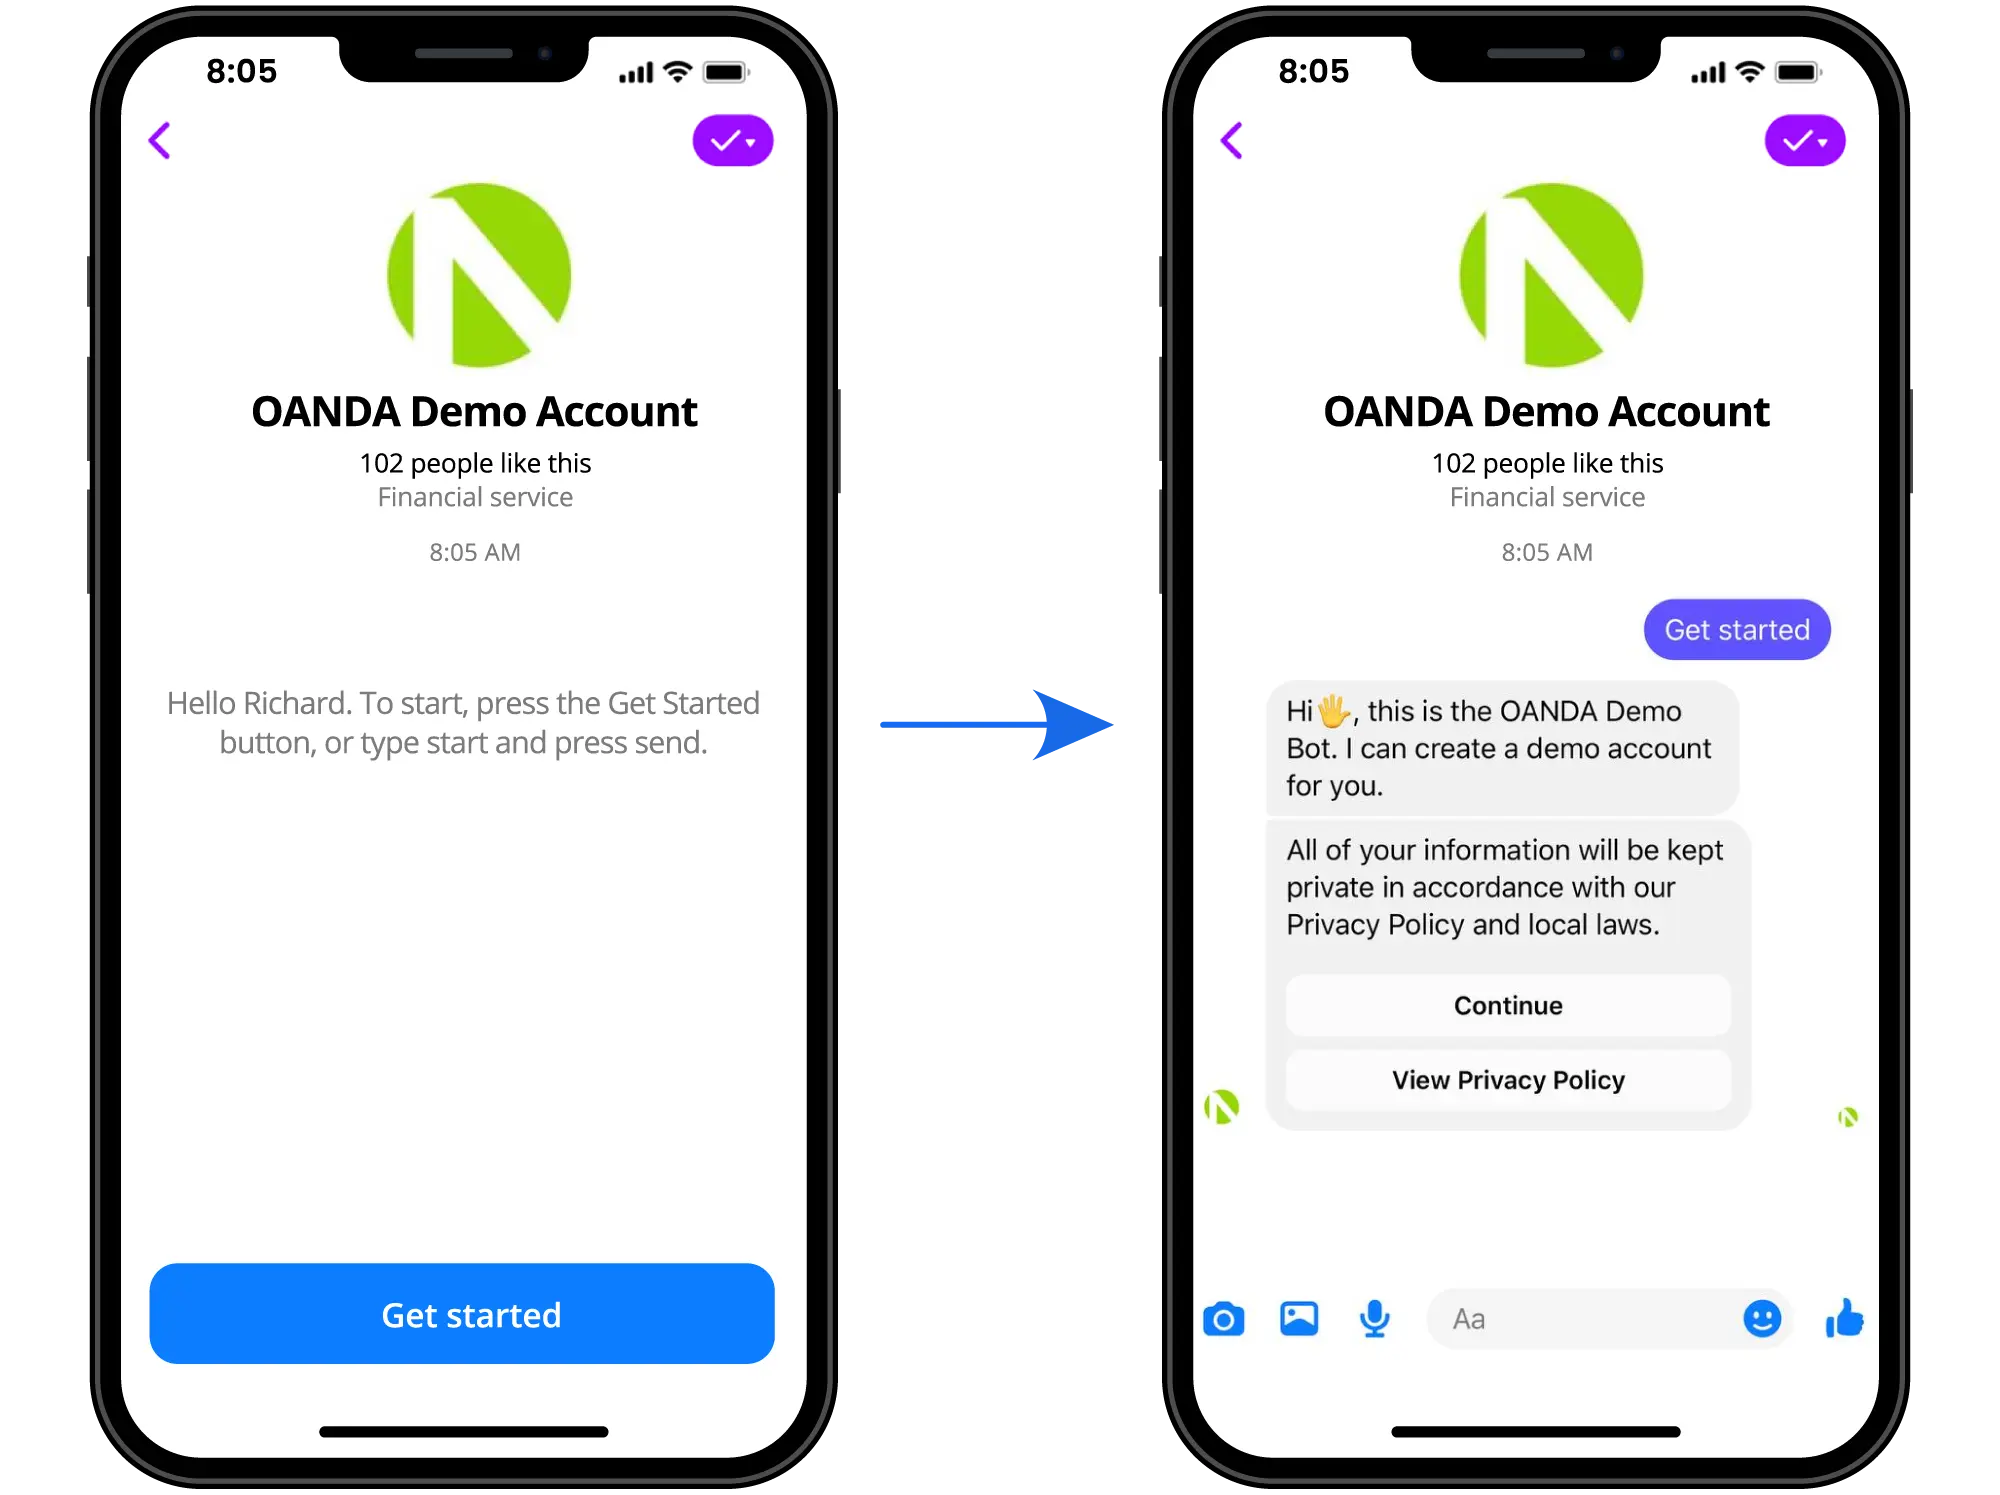 The start-up screen and welcome message of the OANDA Demo Account bot on Facebook Messenger